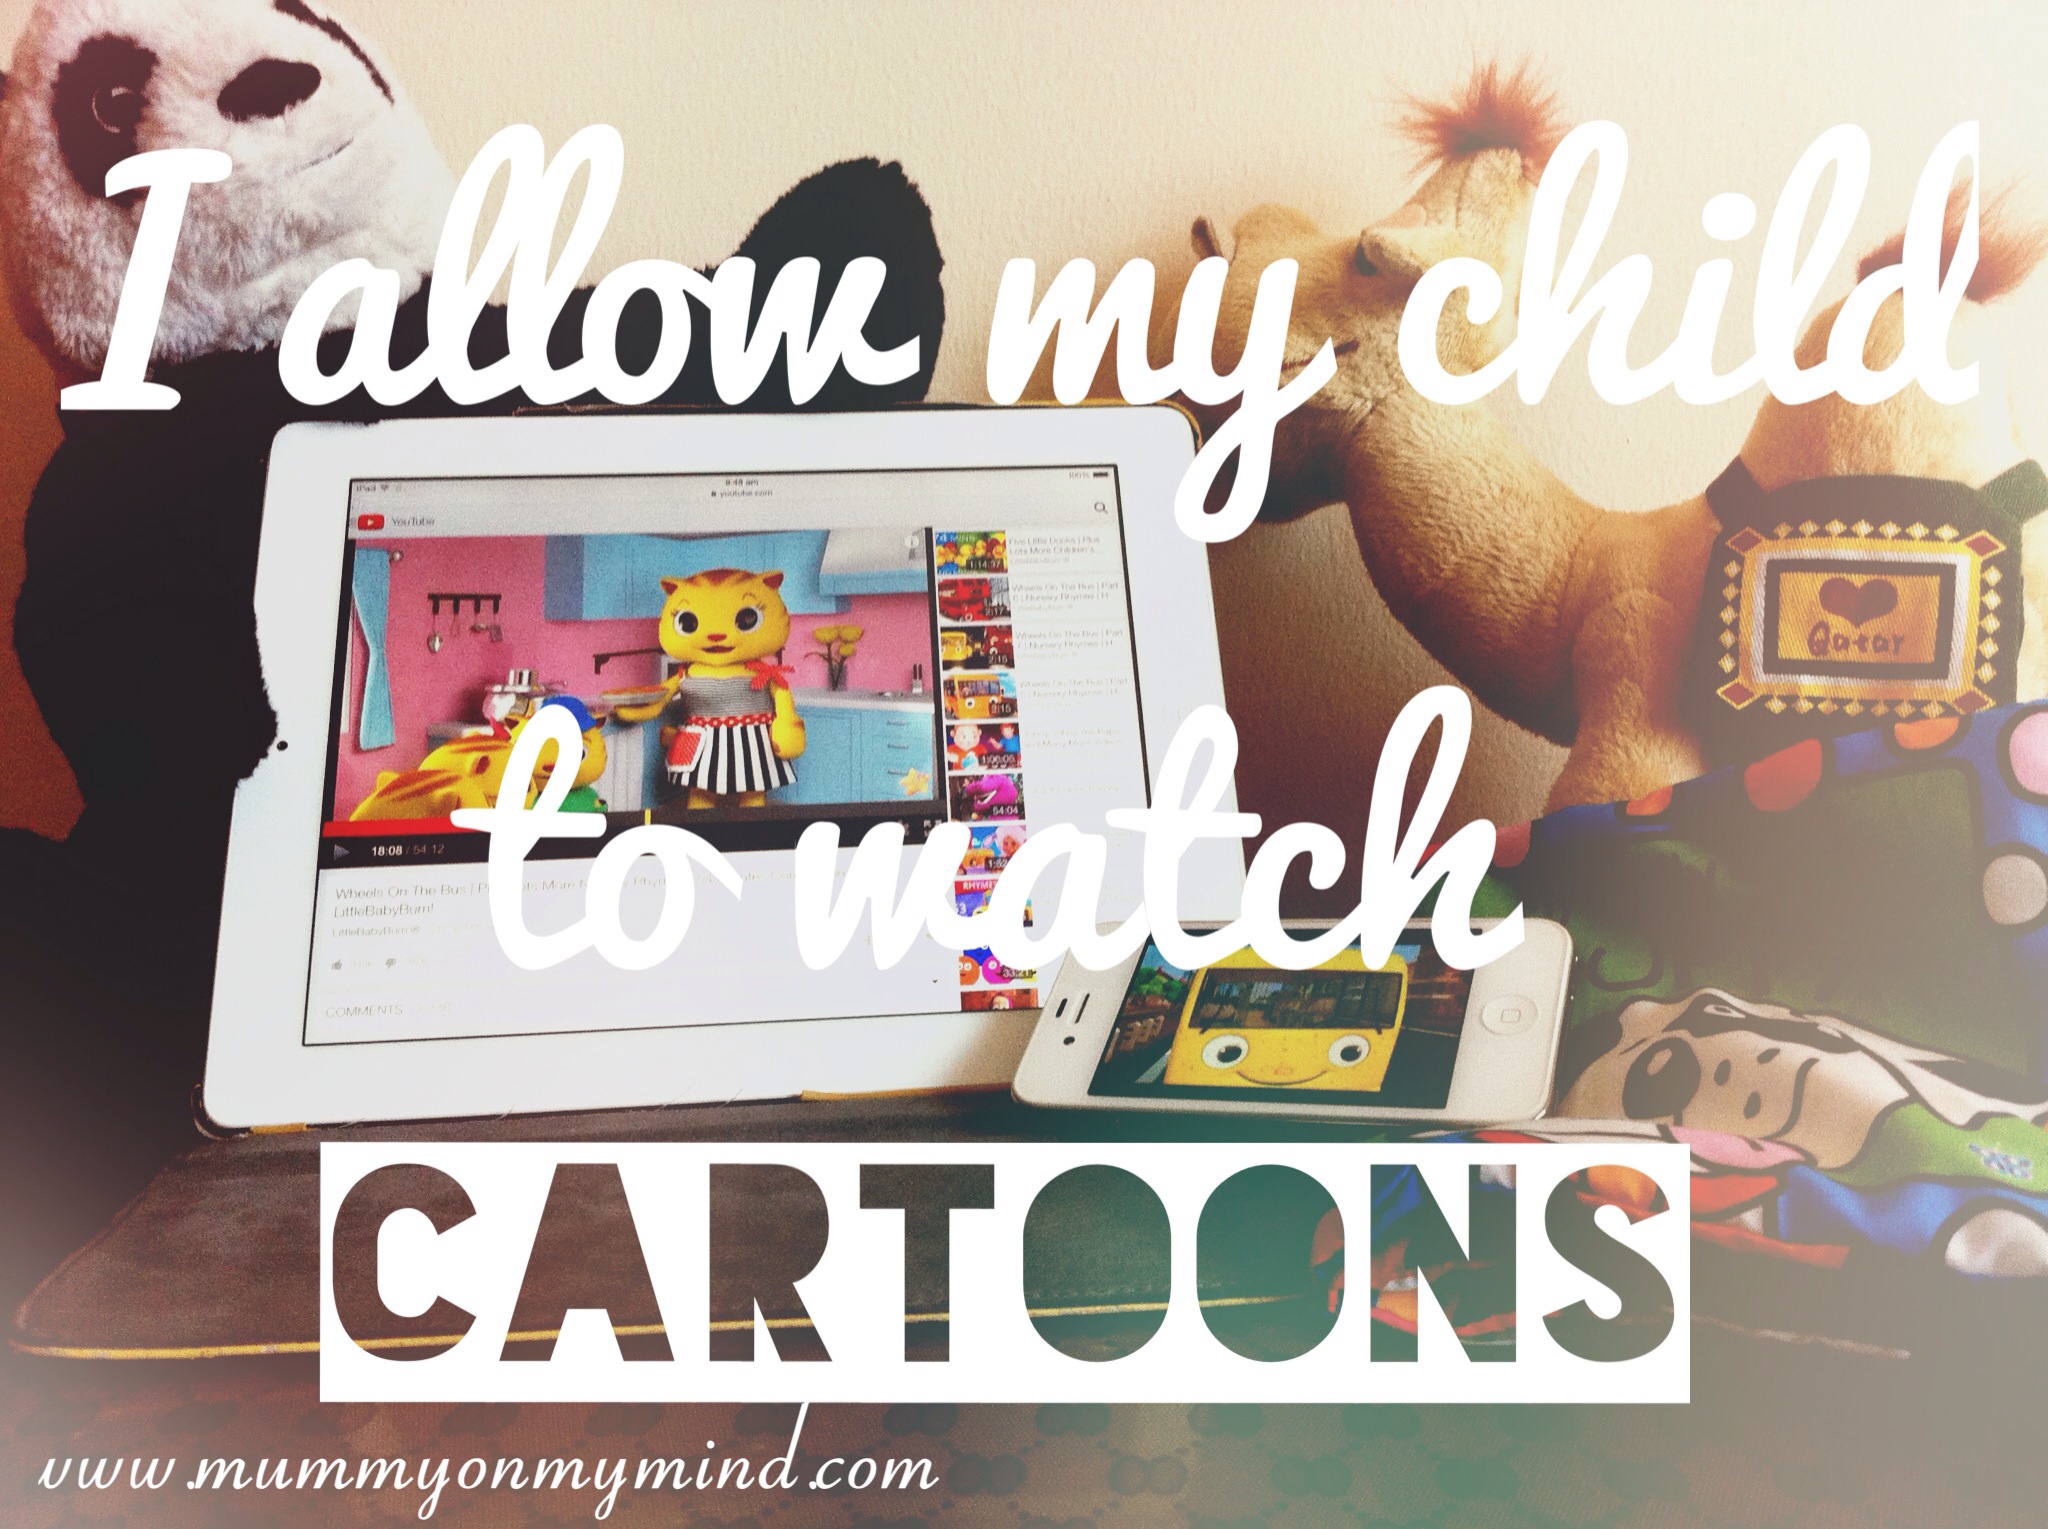 I allow my child to watch cartoons…